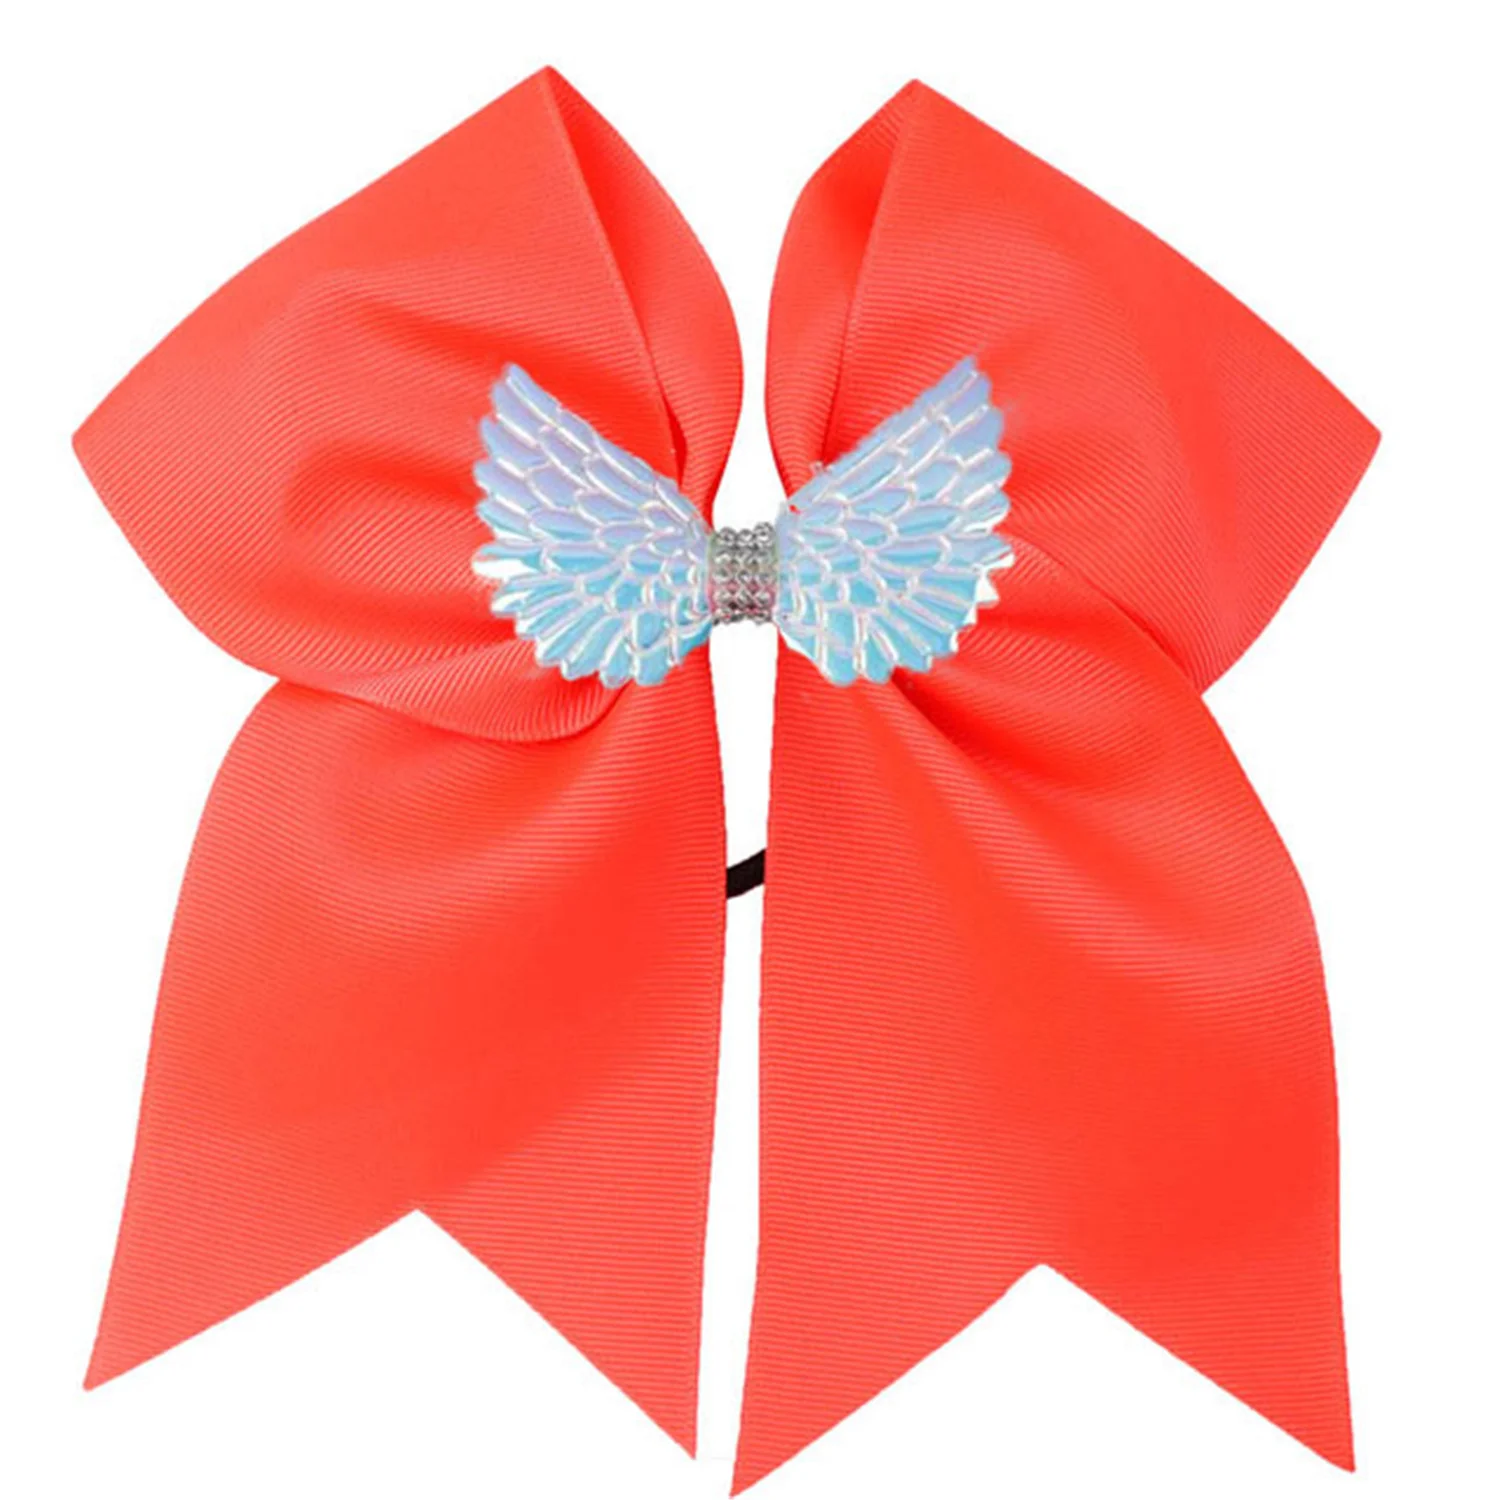 NEW 2pcs/ 7inch angel wings Hair Bow Girls Solid Cheer Bow With Elastic Band Cheerleader Hair Bands For Kids Hair Accessories 10 pcs 25g plastic cheering balls squad spirited fun cheerleading kit cheer poms cheerleaders supples with handle for